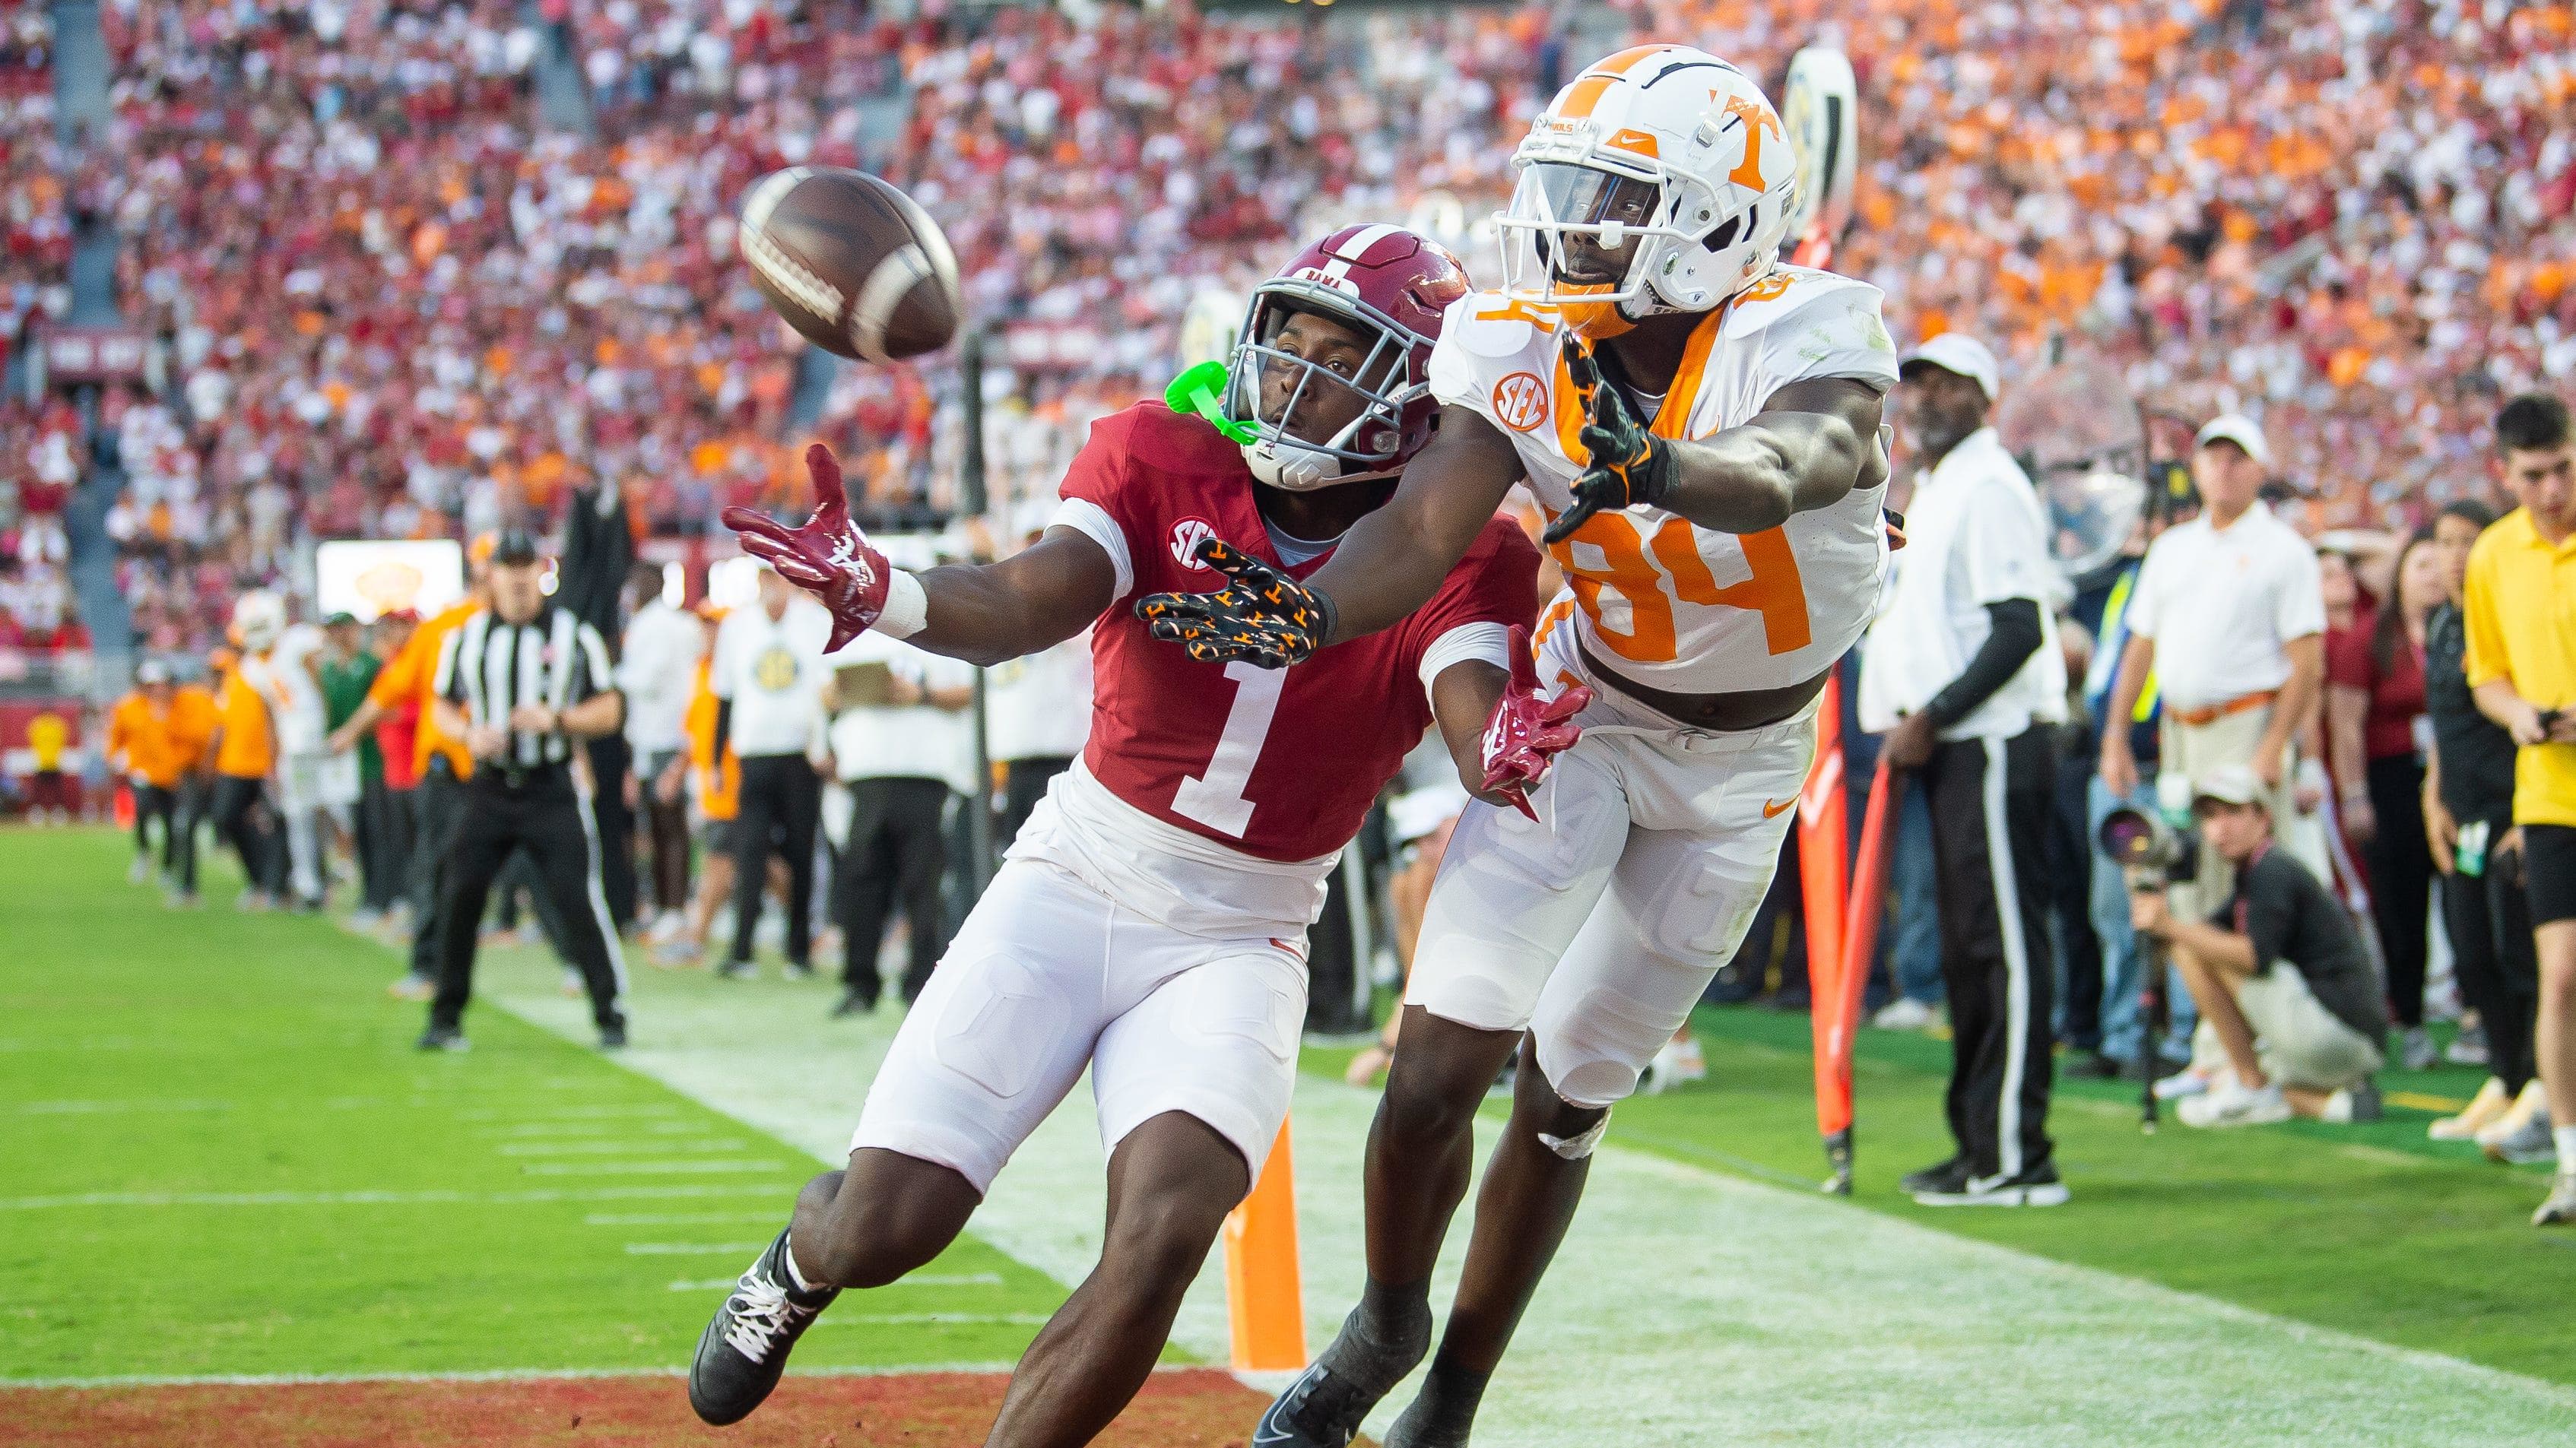 Tennessee wide receiver Kaleb Webb (84) reaches for the ball while defended by Alabama defensive back Kool-Aid McKinstry.